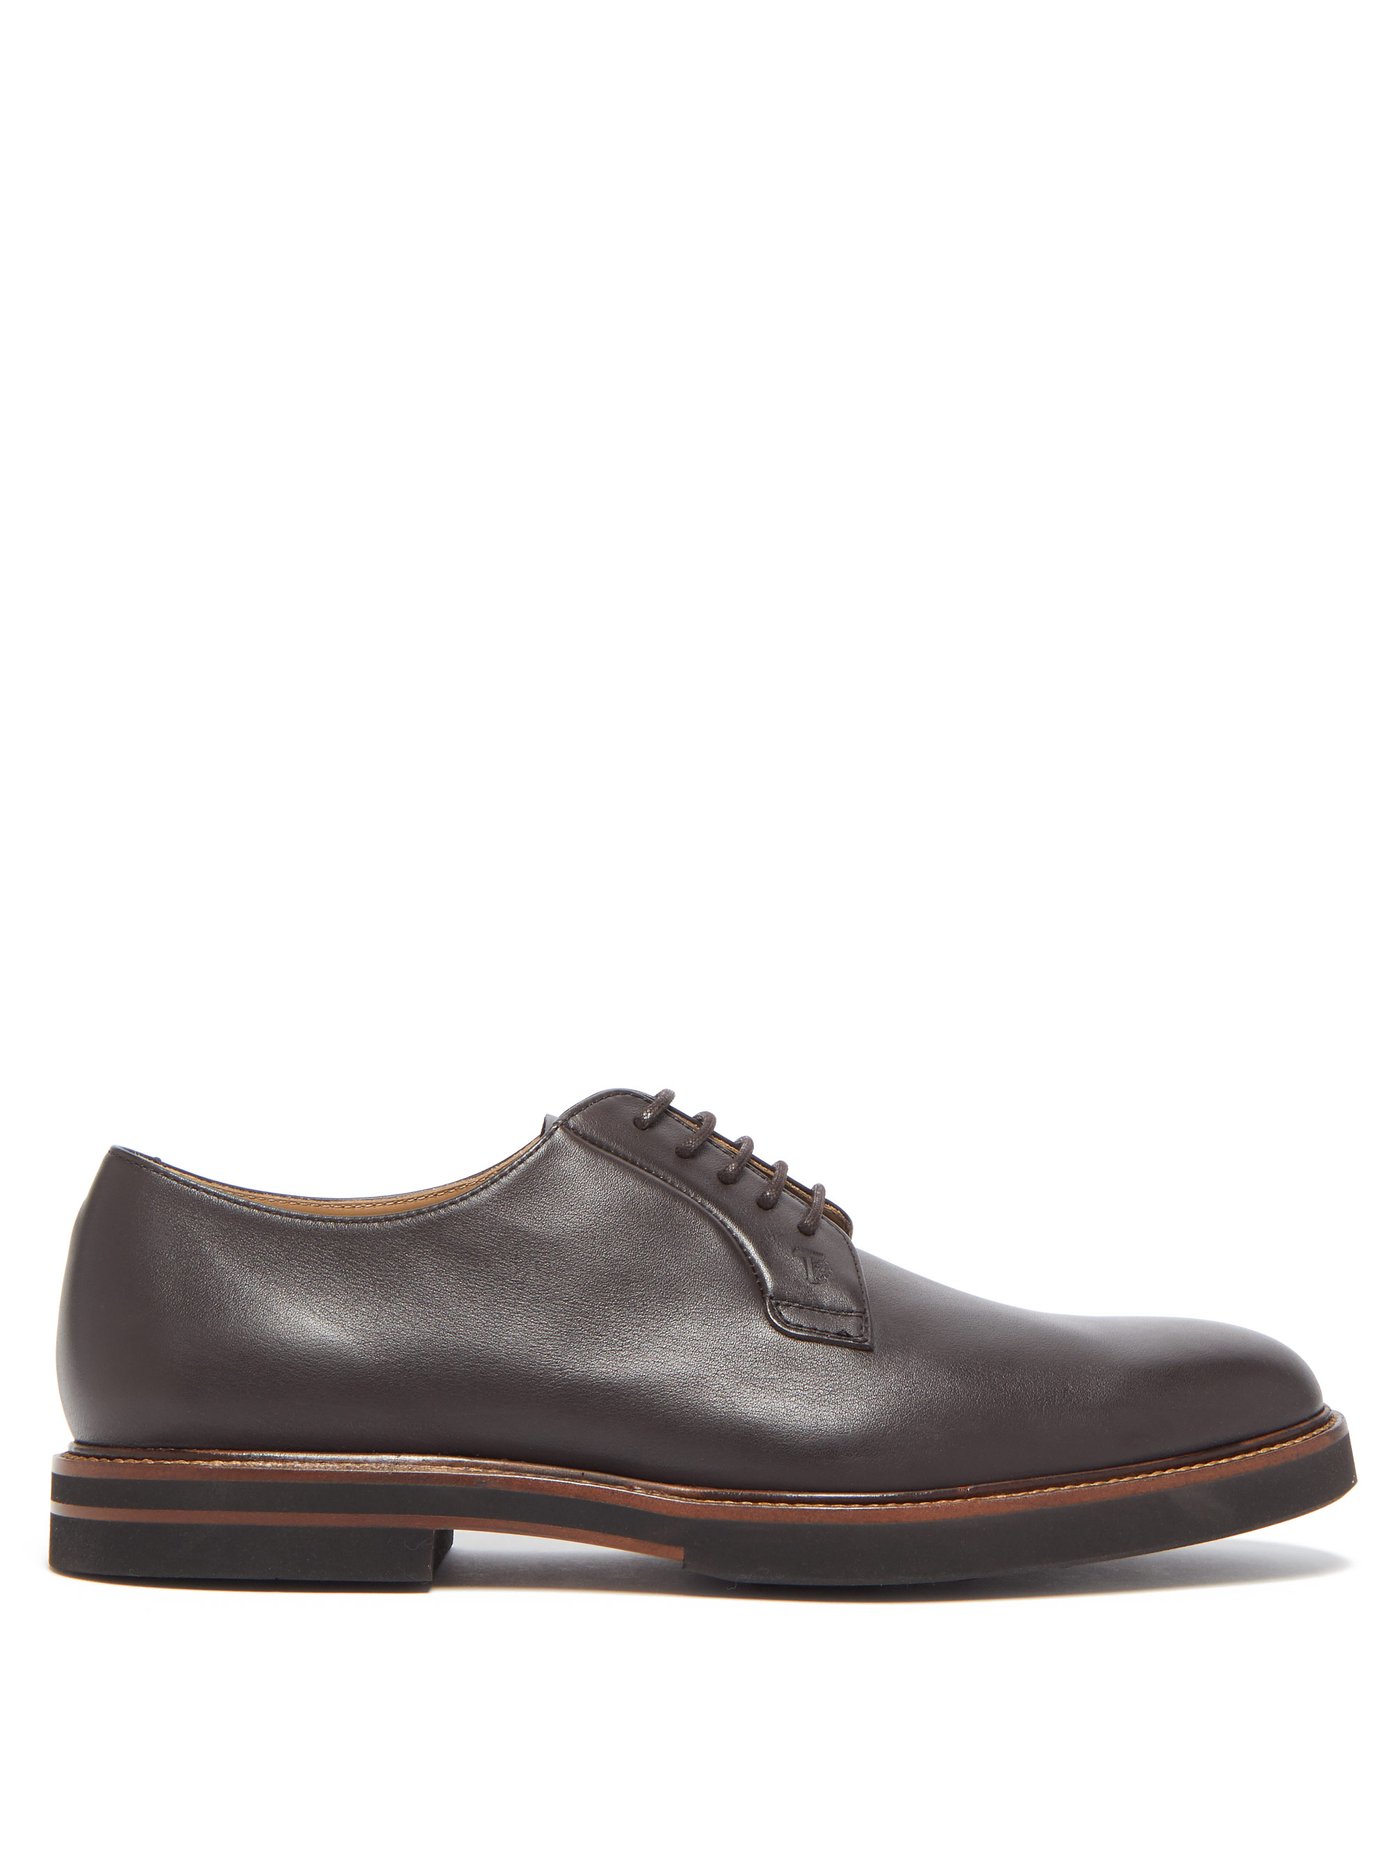 jp tods mens shoes